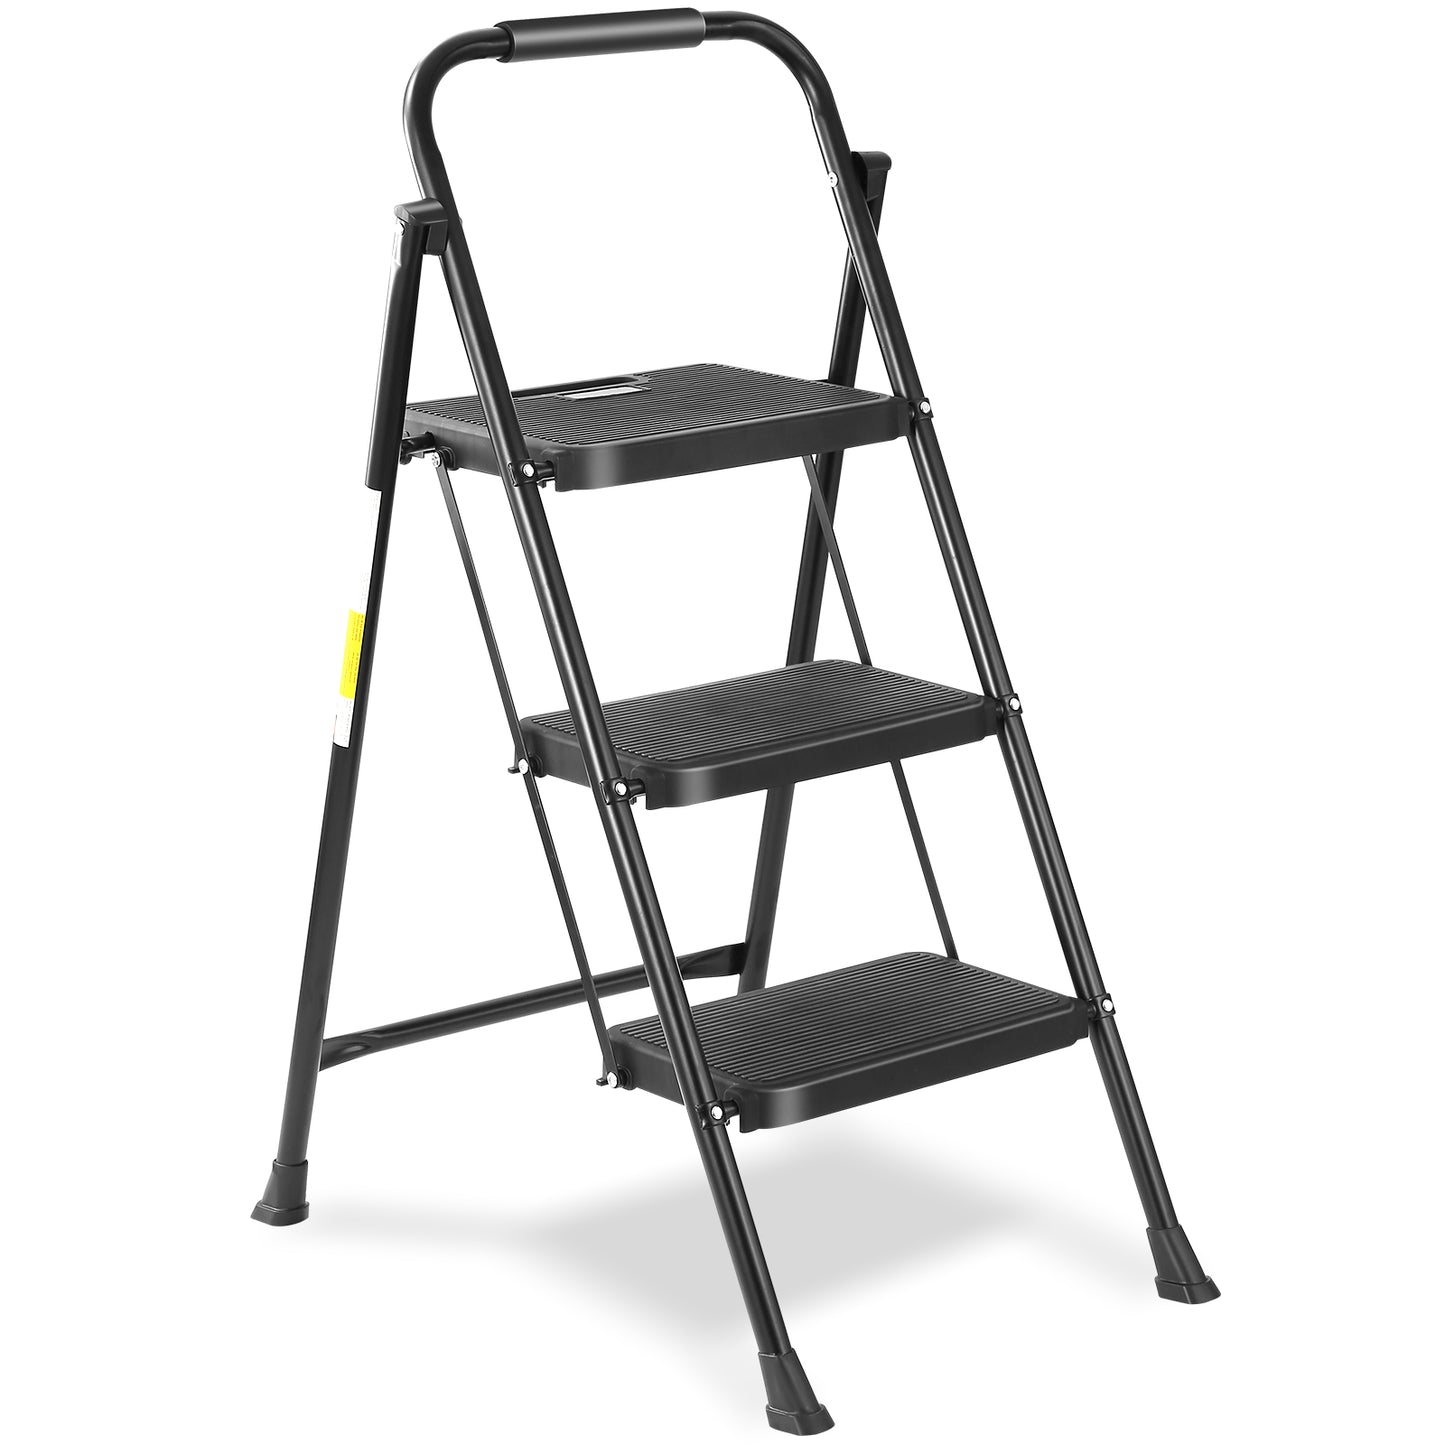 Lifetime Home 3-Step Ladder with Wide Anti-Slip Platform & Thick Rubber Feet - Lightweight Heavy Duty Foldable & Portable - 330 lbs Capacity, Steel Frame, Rubber Handgrip, Folding Step Stool - Black…